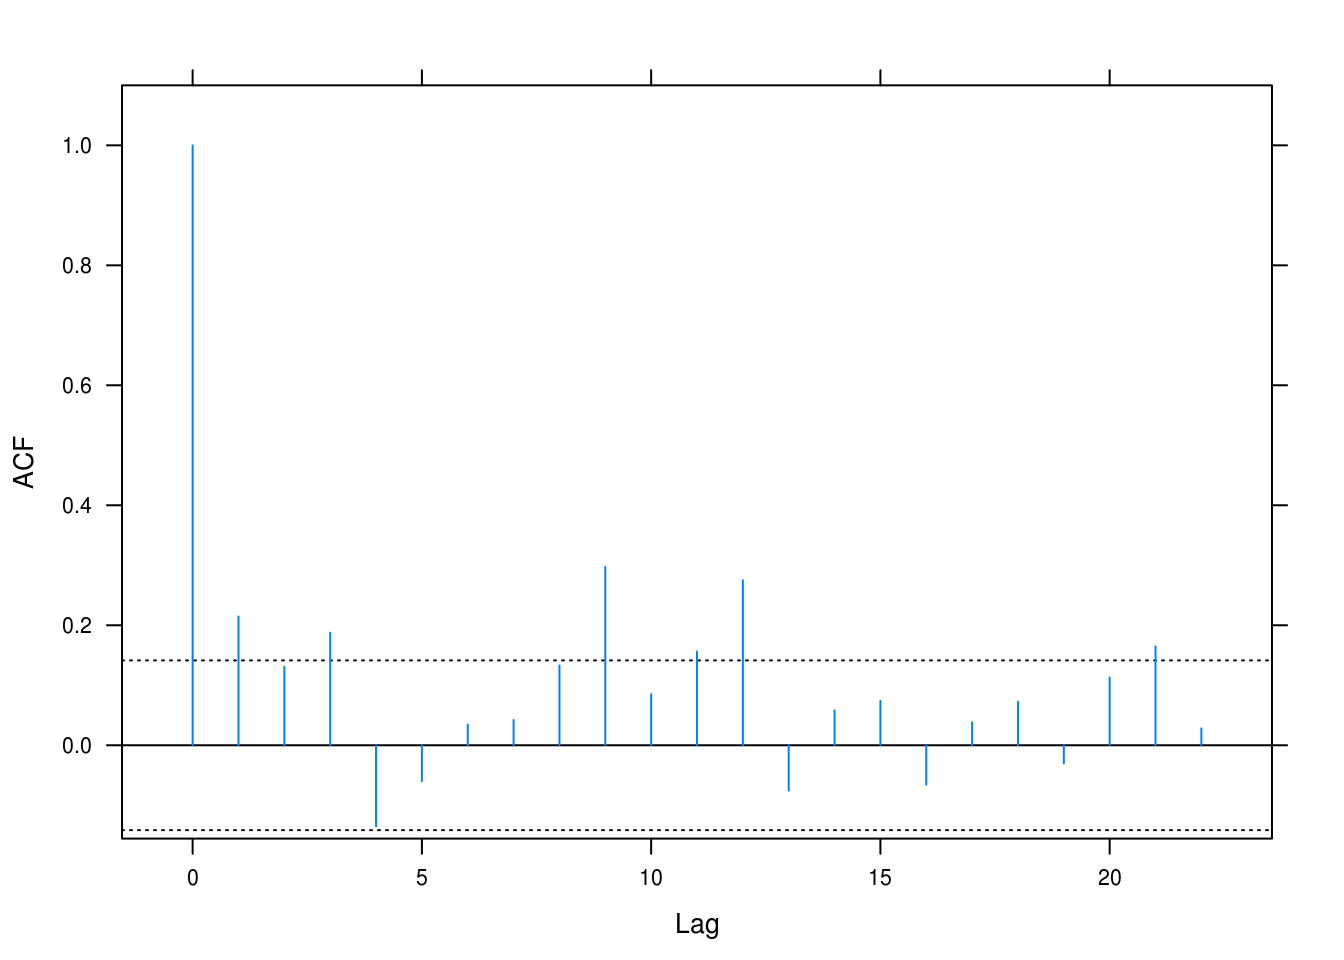 Autocorrelation for the beer sales model.